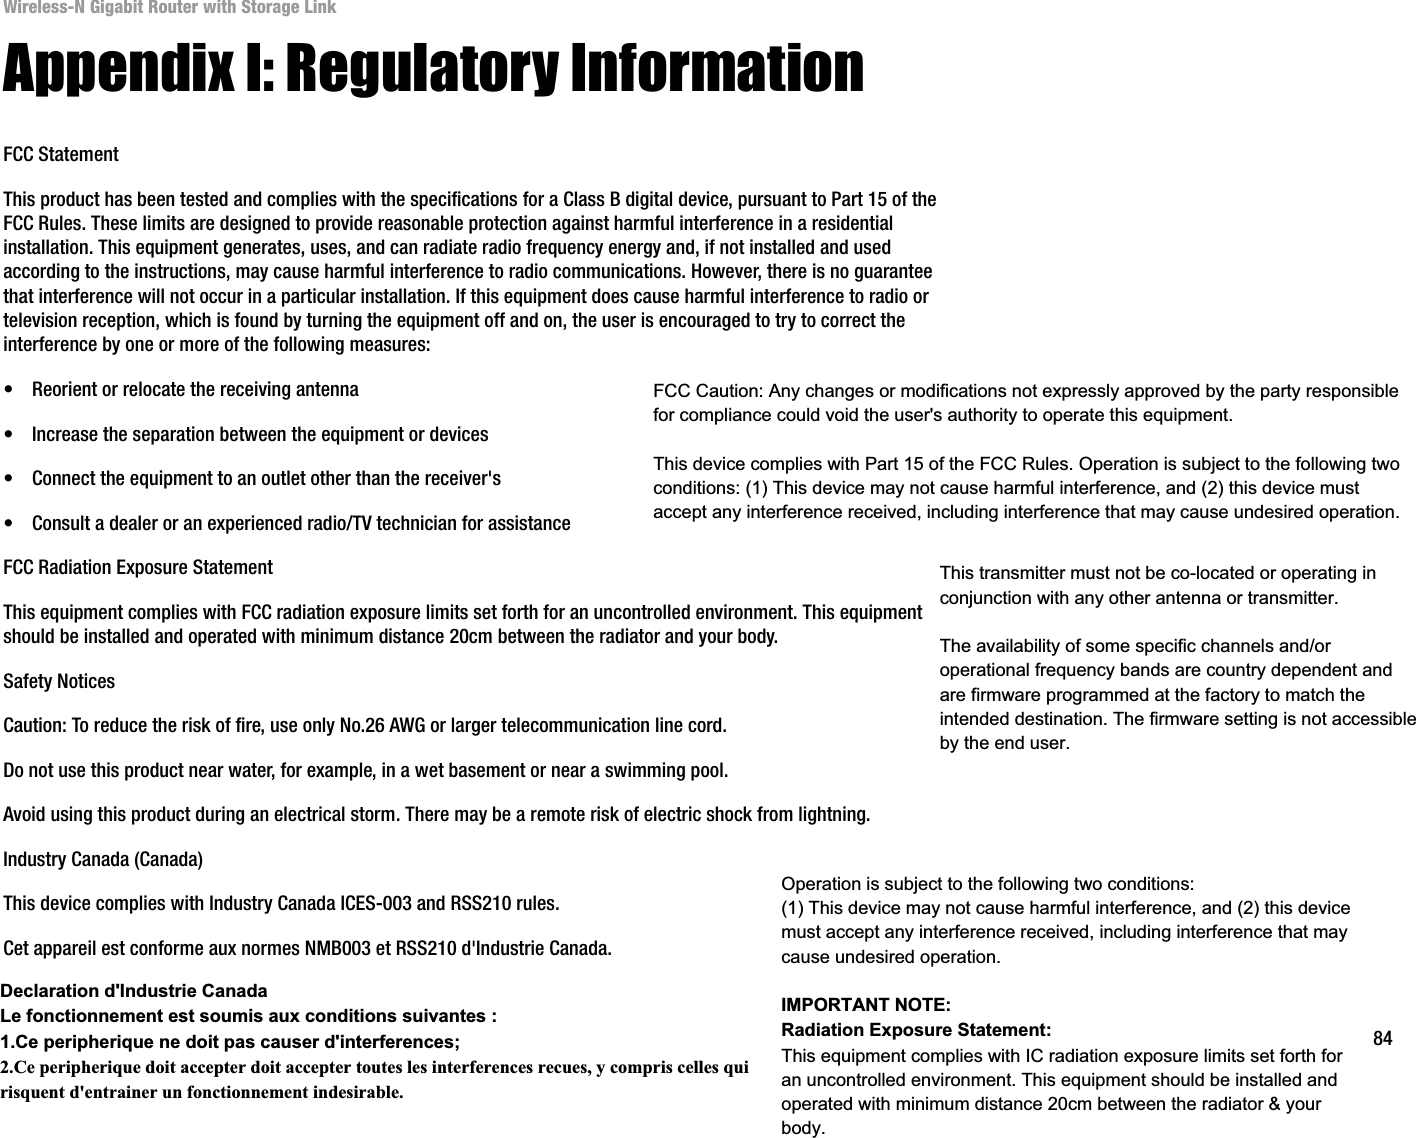 84Appendix I: Regulatory InformationWireless-N Gigabit Router with Storage LinkAppendix I: Regulatory InformationFCC StatementThis product has been tested and complies with the specifications for a Class B digital device, pursuant to Part 15 of the FCC Rules. These limits are designed to provide reasonable protection against harmful interference in a residential installation. This equipment generates, uses, and can radiate radio frequency energy and, if not installed and used according to the instructions, may cause harmful interference to radio communications. However, there is no guarantee that interference will not occur in a particular installation. If this equipment does cause harmful interference to radio or television reception, which is found by turning the equipment off and on, the user is encouraged to try to correct the interference by one or more of the following measures:• Reorient or relocate the receiving antenna• Increase the separation between the equipment or devices• Connect the equipment to an outlet other than the receiver&apos;s• Consult a dealer or an experienced radio/TV technician for assistanceFCC Radiation Exposure StatementThis equipment complies with FCC radiation exposure limits set forth for an uncontrolled environment. This equipment should be installed and operated with minimum distance 20cm between the radiator and your body.Safety NoticesCaution: To reduce the risk of fire, use only No.26 AWG or larger telecommunication line cord.Do not use this product near water, for example, in a wet basement or near a swimming pool.Avoid using this product during an electrical storm. There may be a remote risk of electric shock from lightning.Industry Canada (Canada)This device complies with Industry Canada ICES-003 and RSS210 rules.Cet appareil est conforme aux normes NMB003 et RSS210 d&apos;Industrie Canada.FCC Caution: Any changes or modifications not expressly approved by the party responsiblefor compliance could void the user&apos;s authority to operate this equipment.This device complies with Part 15 of the FCC Rules. Operation is subject to the following two conditions: (1) This device may not cause harmful interference, and (2) this device must accept any interference received, including interference that may cause undesired operation.This transmitter must not be co-located or operating in conjunction with any other antenna or transmitter.The availability of some specific channels and/or operational frequency bands are country dependent and are firmware programmed at the factory to match the intended destination. The firmware setting is not accessible by the end user.Declaration d&apos;Industrie CanadaLe fonctionnement est soumis aux conditions suivantes : 1.Ce peripherique ne doit pas causer d&apos;interferences; 2.Ce peripherique doit accepter doit accepter toutes les interferences recues, y compris celles qui risquent d&apos;entrainer un fonctionnement indesirable.Operation is subject to the following two conditions: (1) This device may not cause harmful interference, and (2) this device must accept any interference received, including interference that may cause undesired operation.IMPORTANT NOTE:Radiation Exposure Statement:This equipment complies with IC radiation exposure limits set forth for an uncontrolled environment. This equipment should be installed and operated with minimum distance 20cm between the radiator &amp; your body.